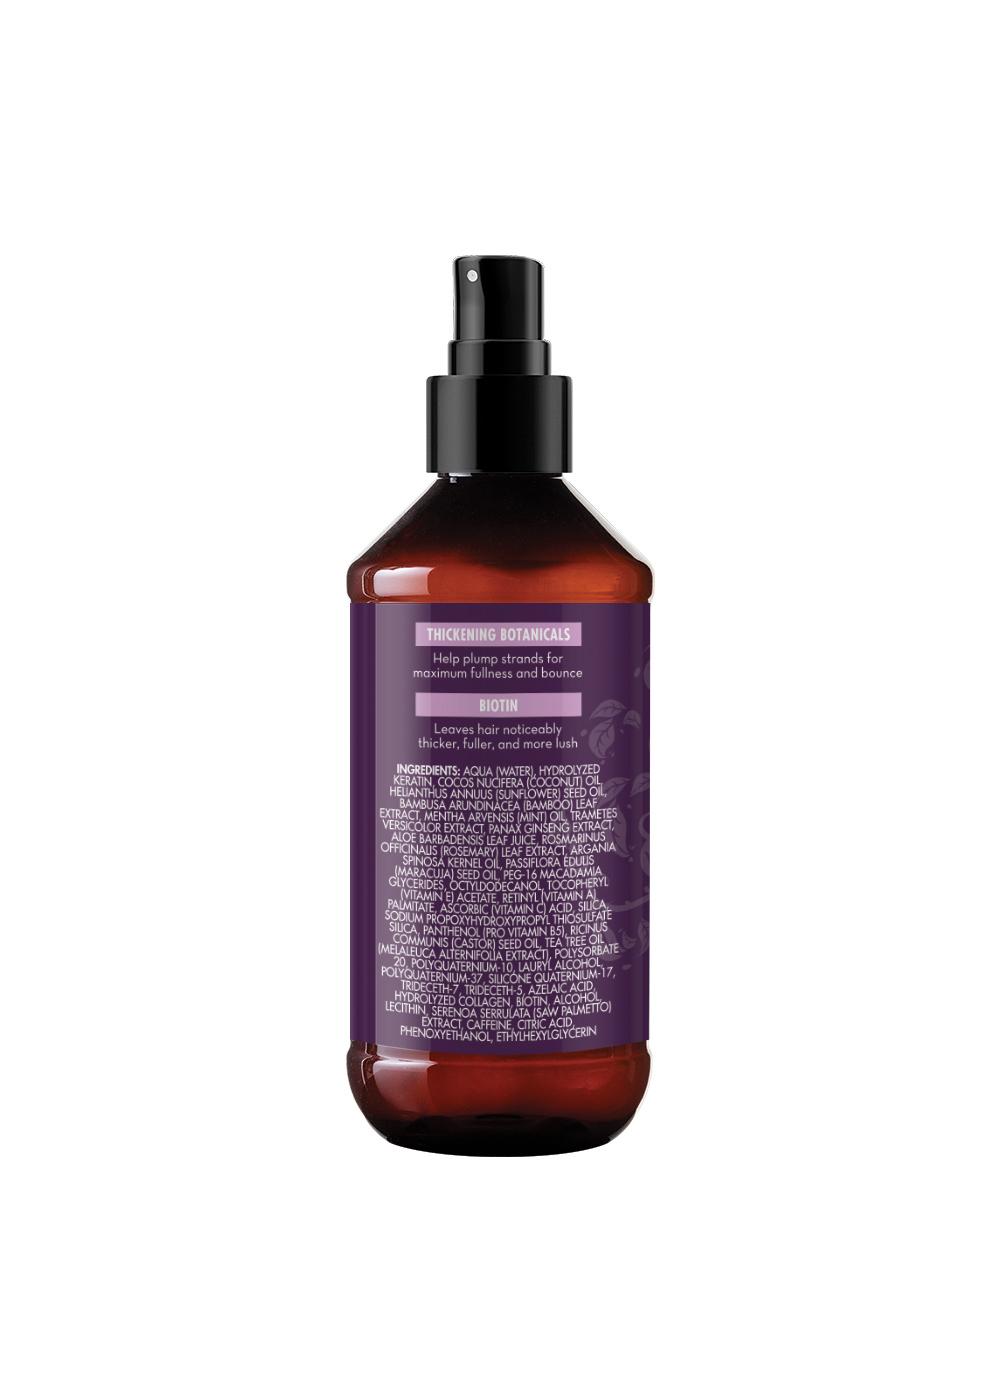 Arganatural Thick Biotin Leave In Conditioner; image 3 of 3